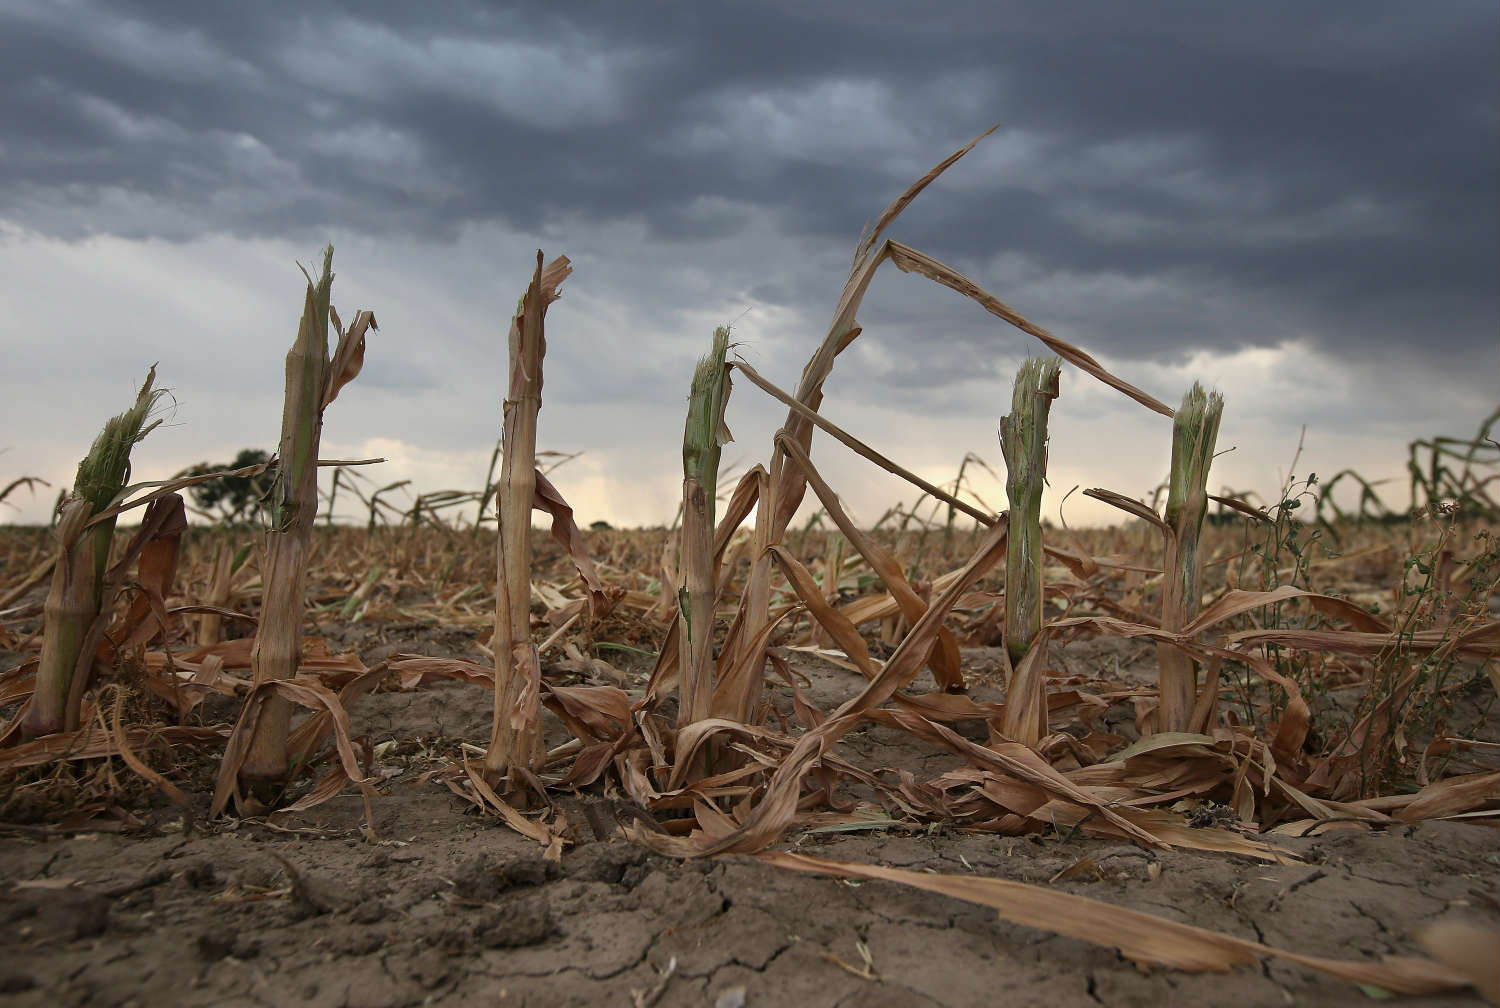 Climate change impacts crop yields